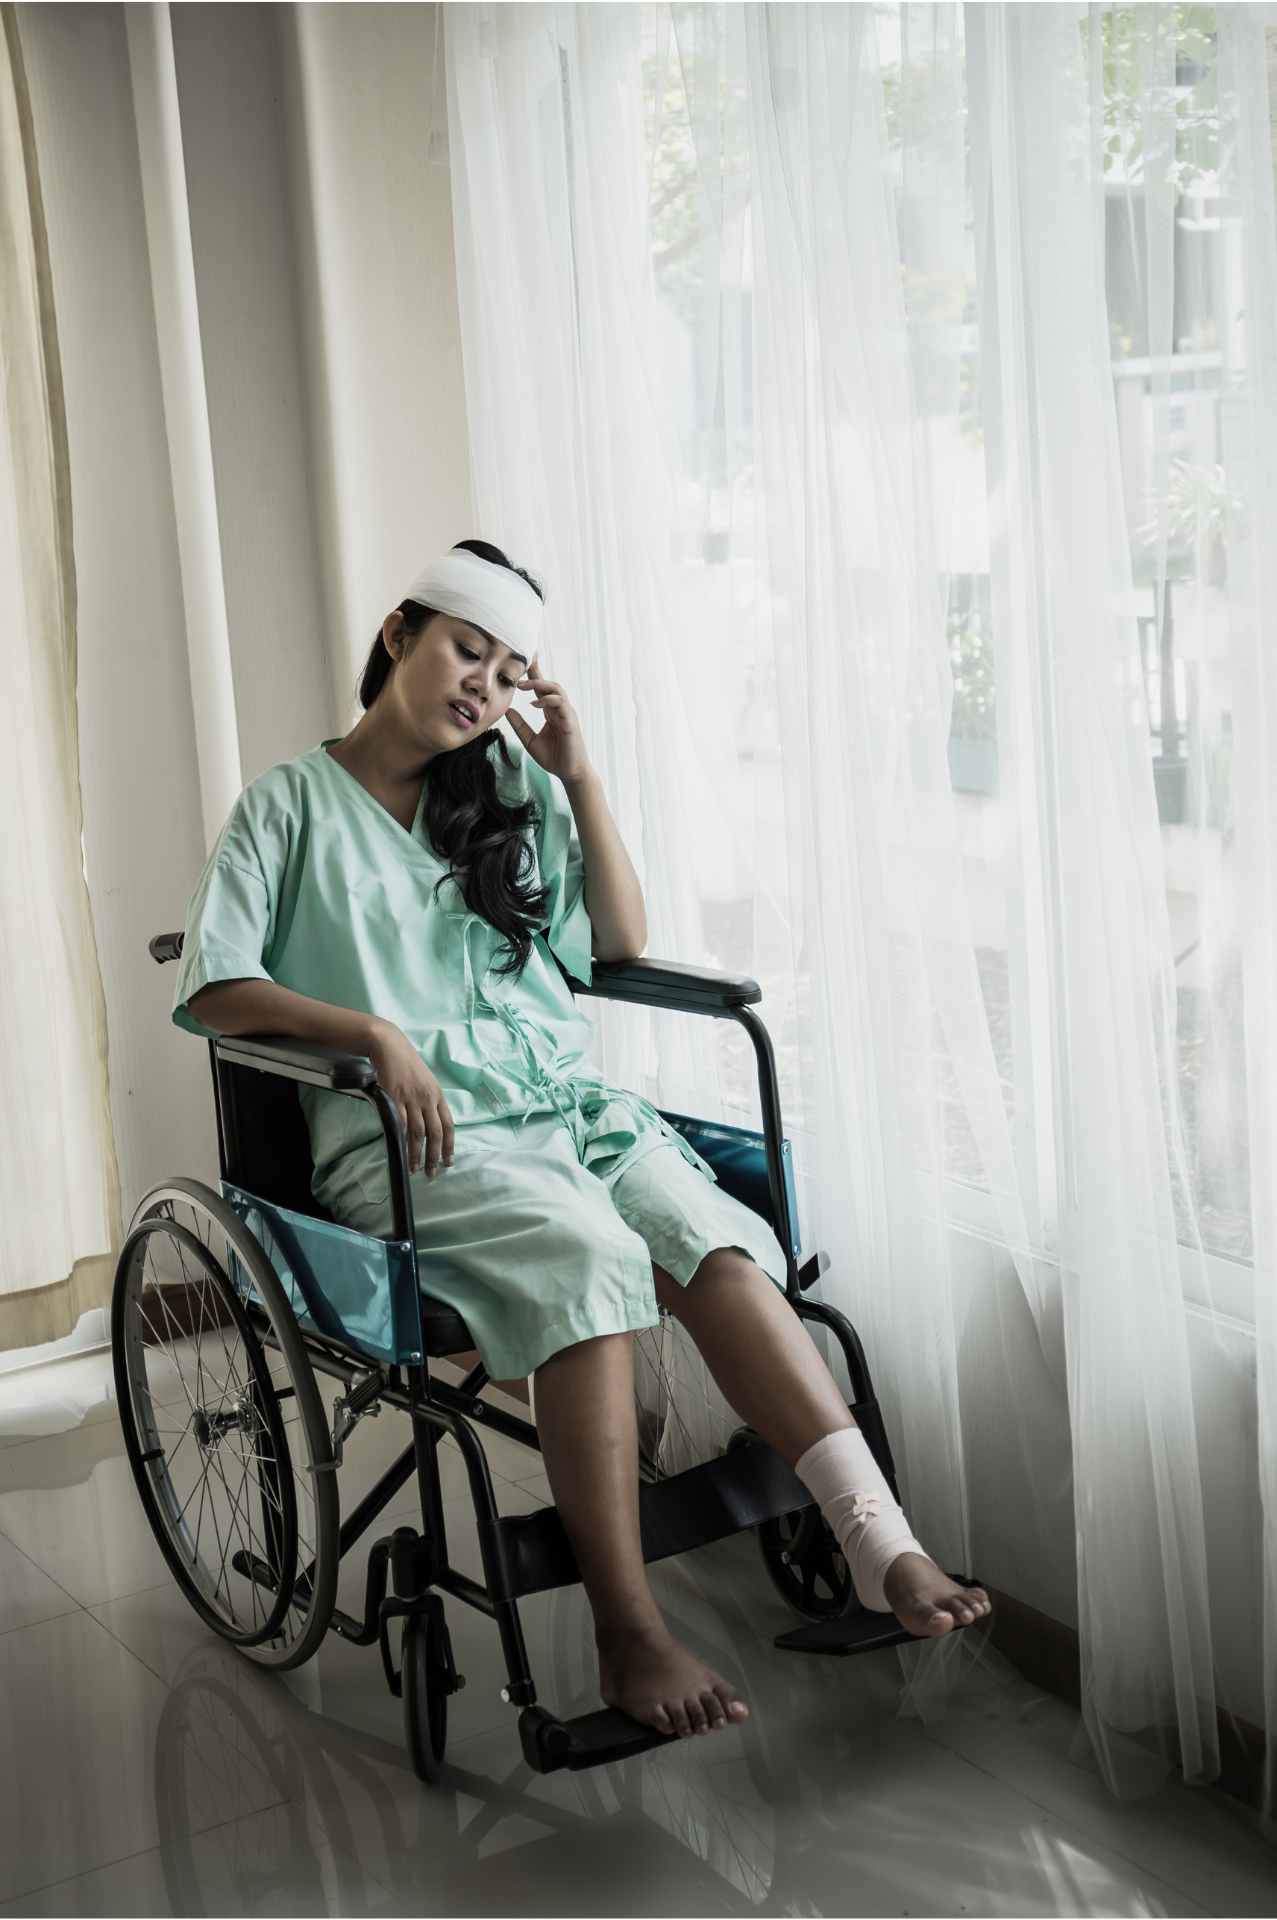 A woman is sitting in a wheelchair with a bandage on her head.